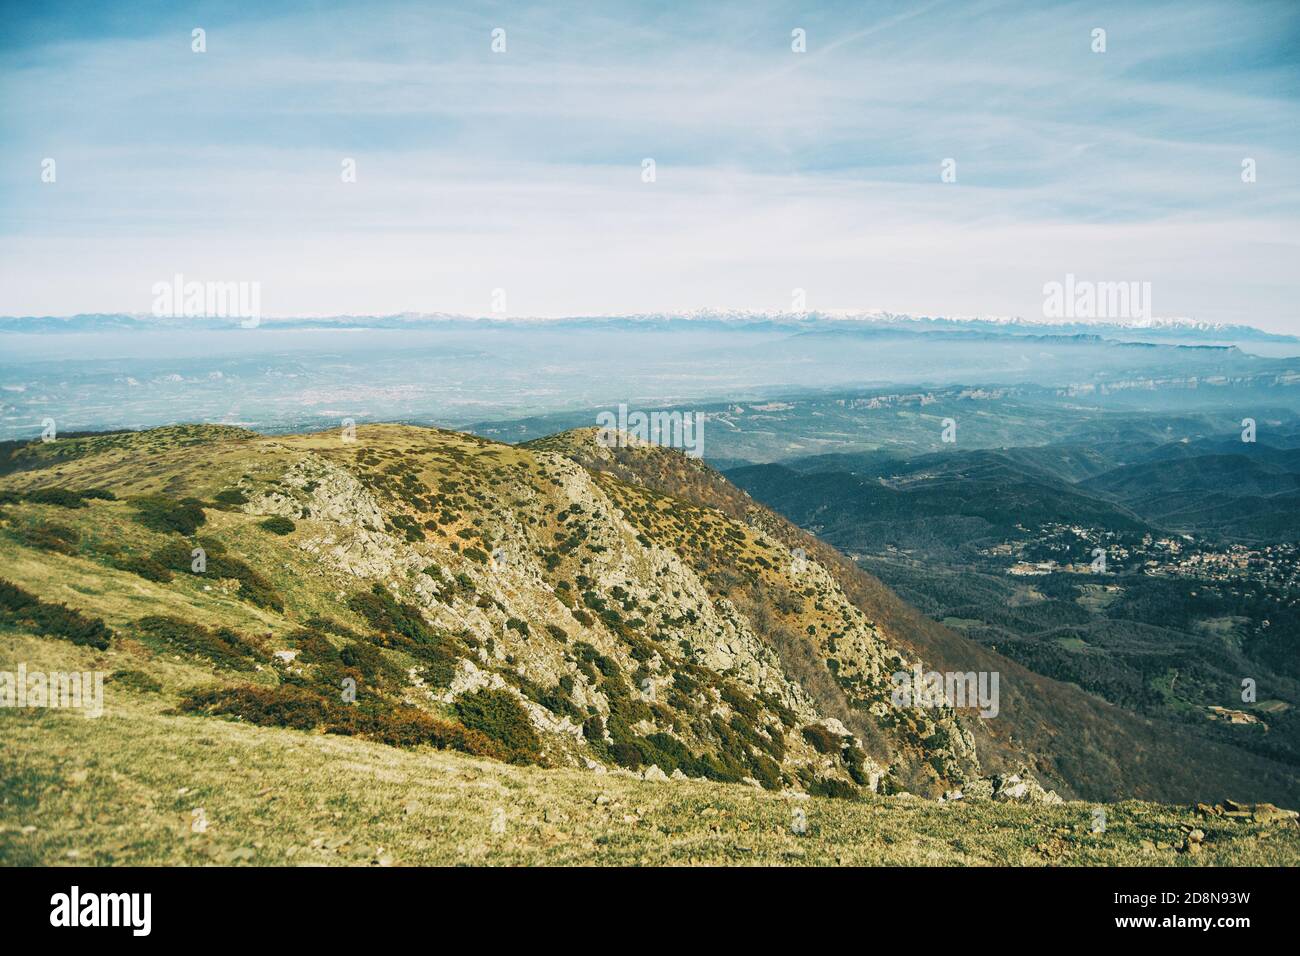 Landscape of a yellowish peak with an extension of green fields below and a snowy mountain range far on the background Stock Photo